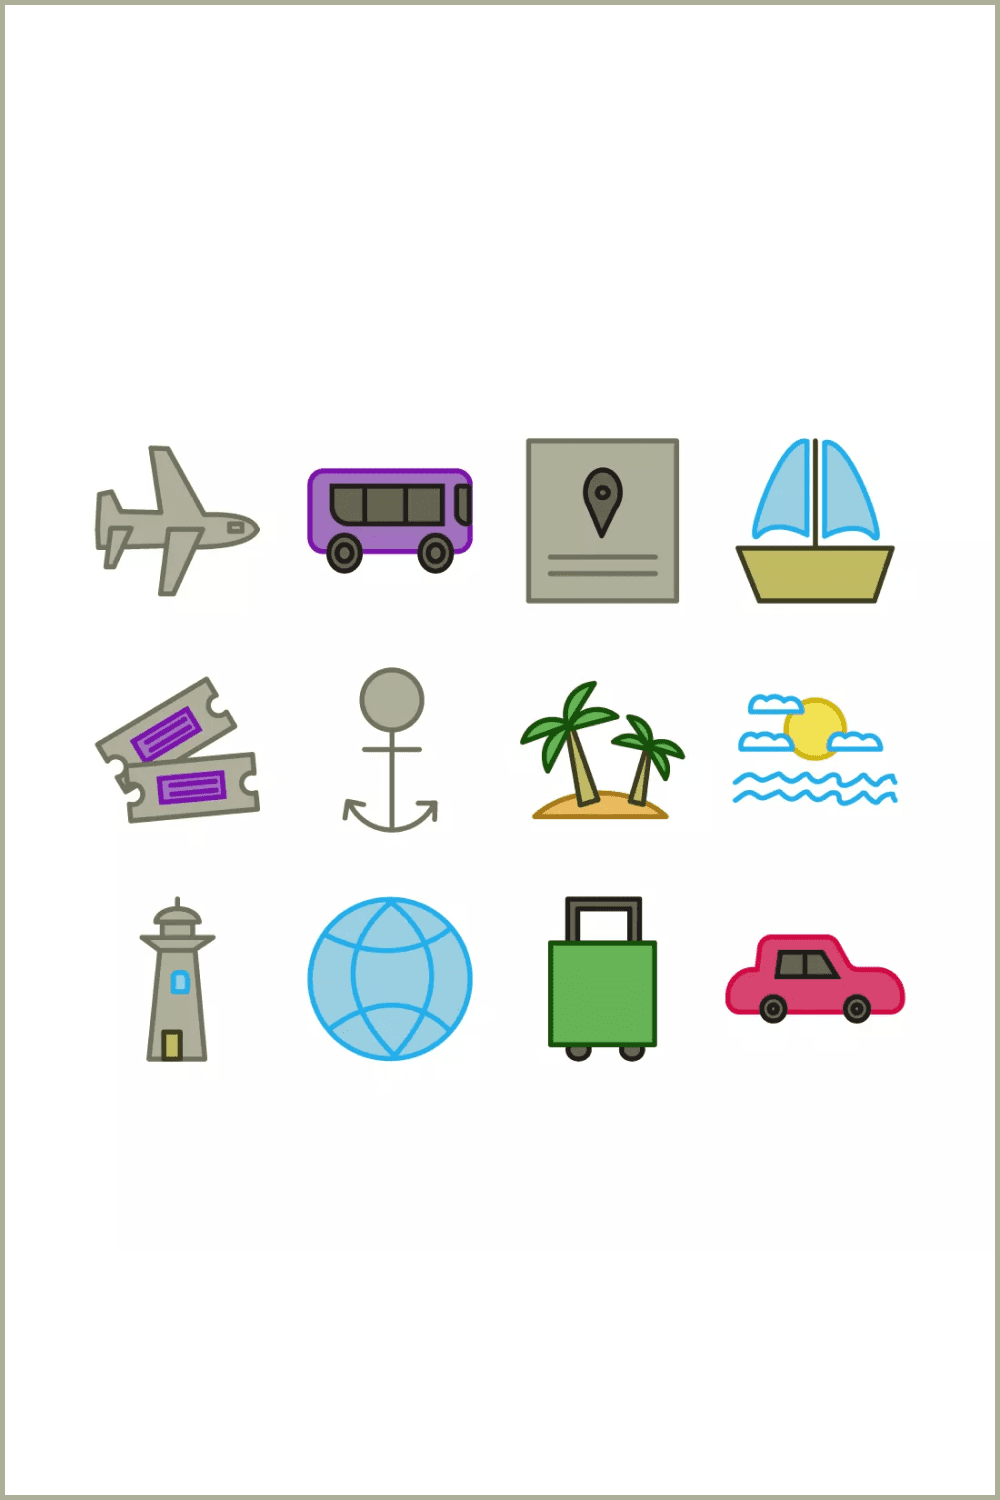 A collage of icons of an airplane, a bus, a car, palm trees, yachts, a lighthouse.